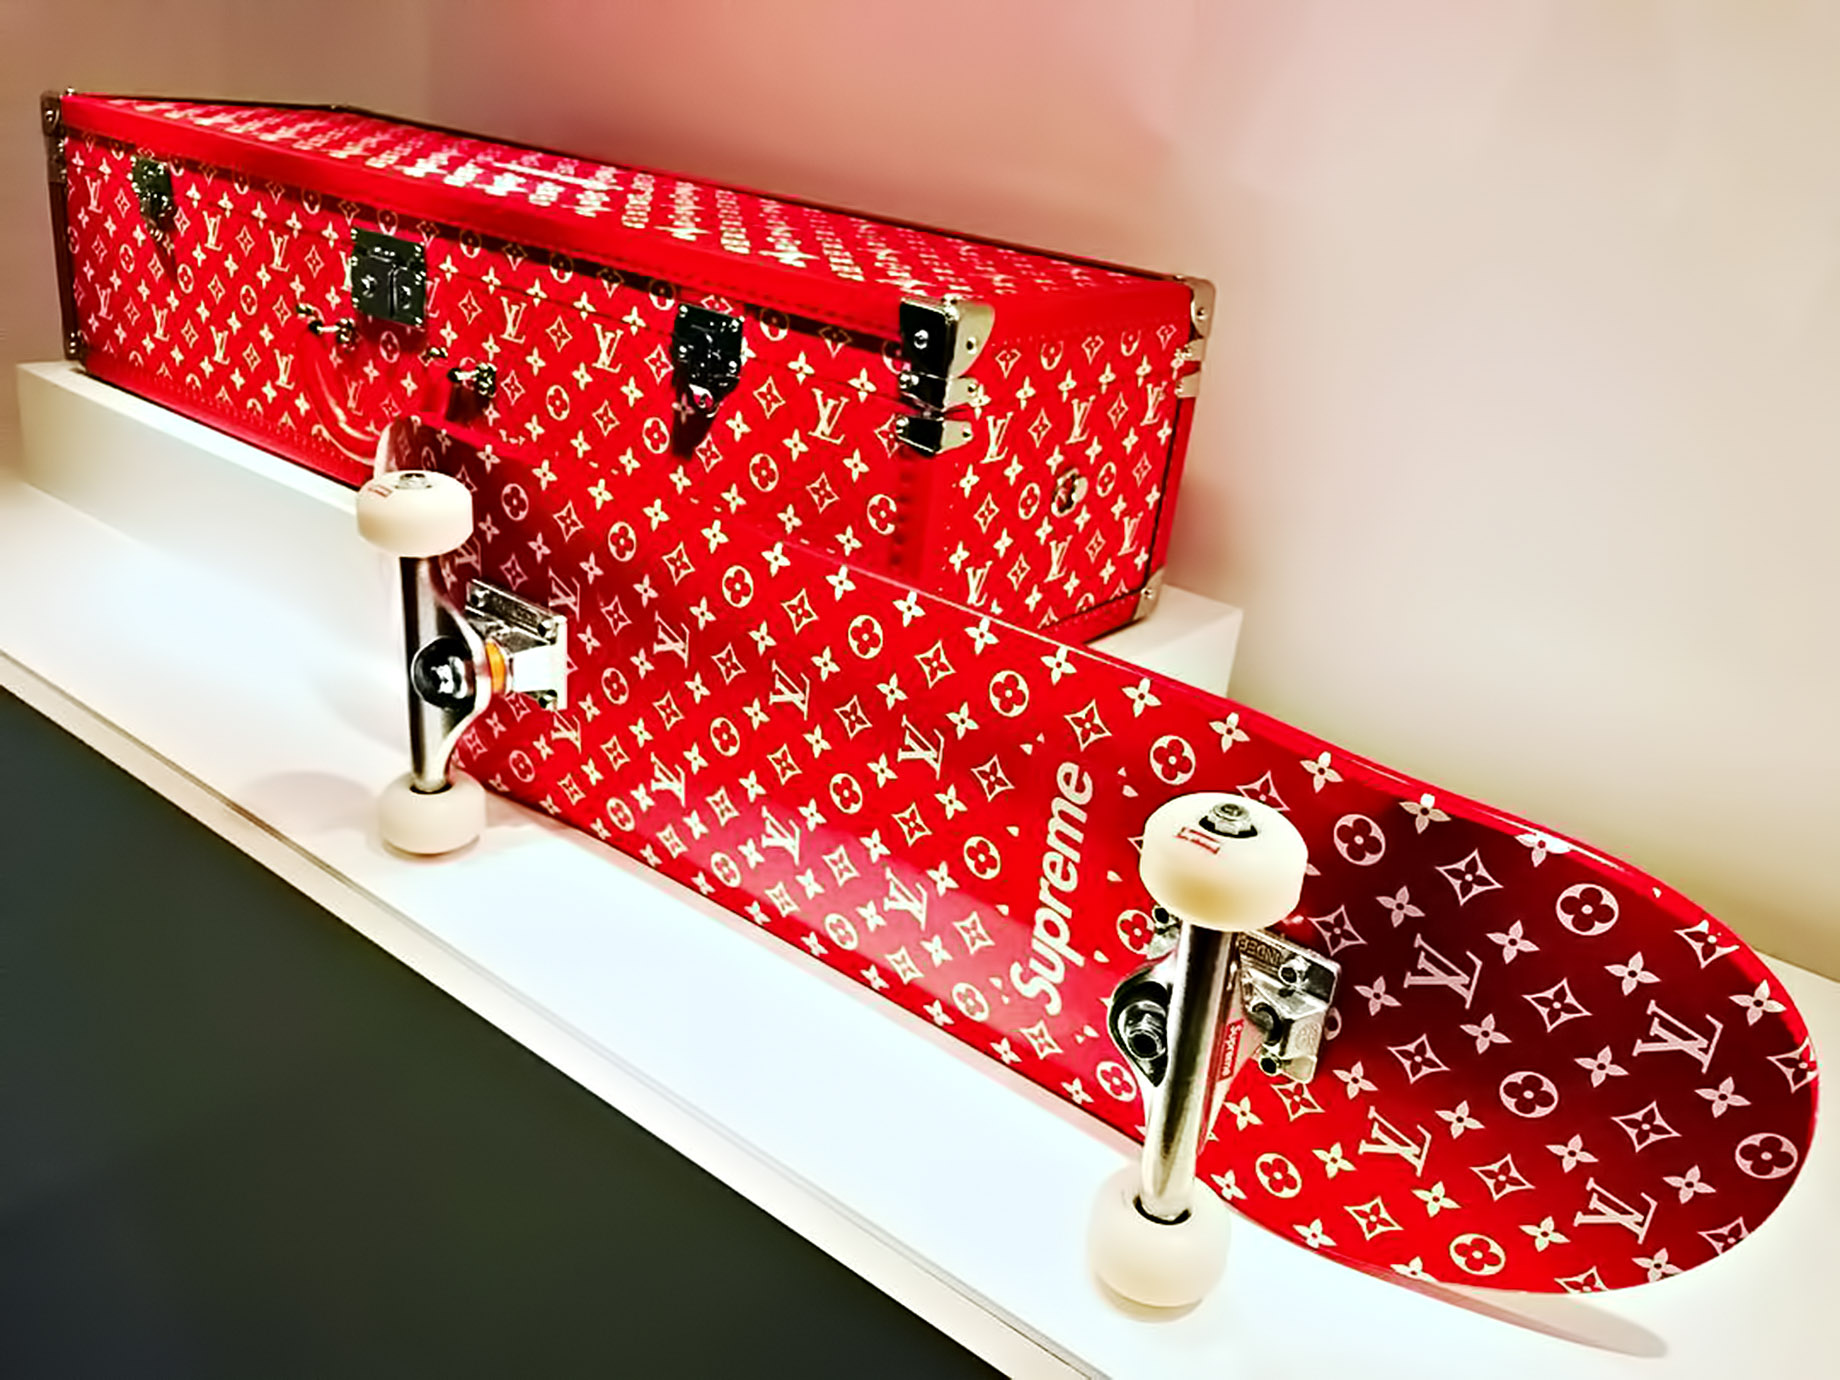 Louis Vuitton Supreme Skateboard - Dreaming Big - 6 Luxury Items You Could Purchase if Money Was No Object